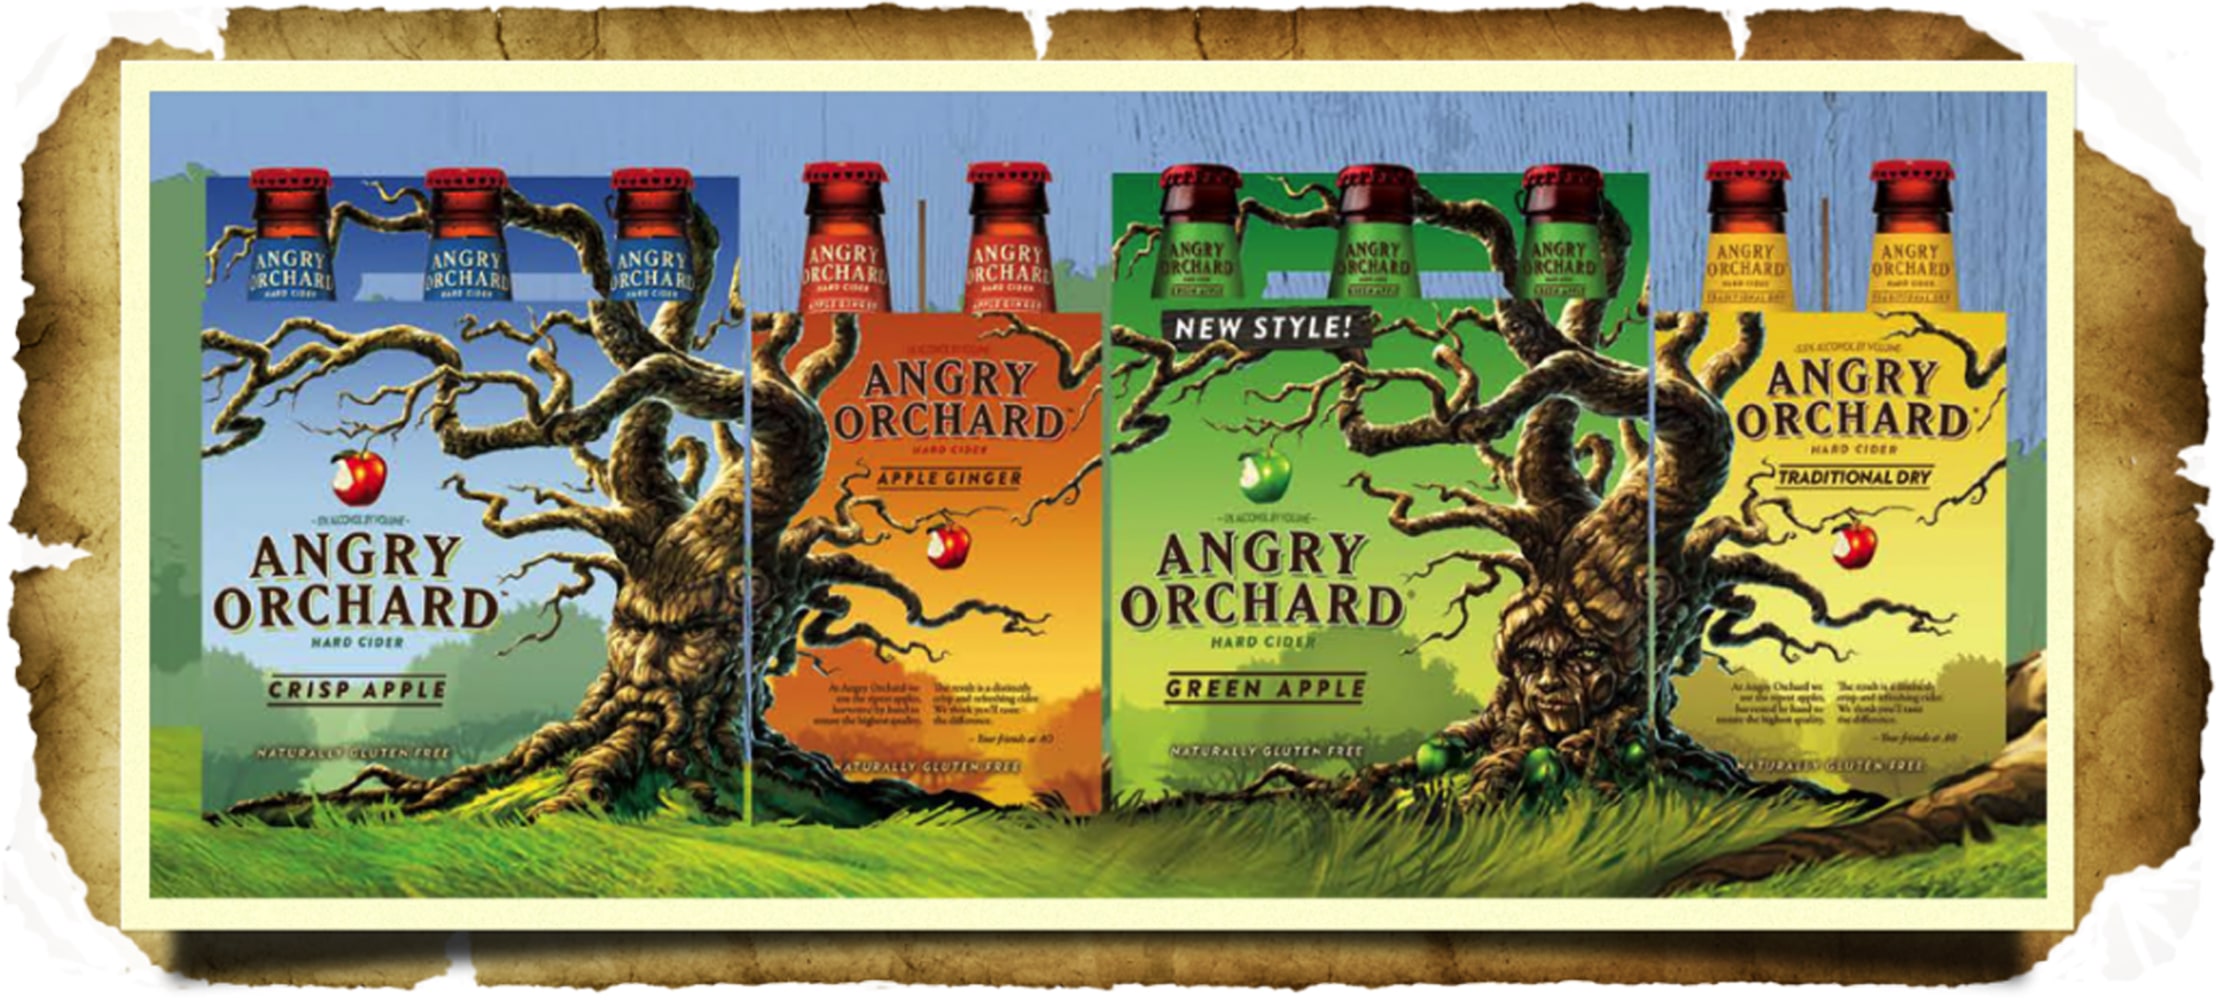 Angry Orchard Rebate